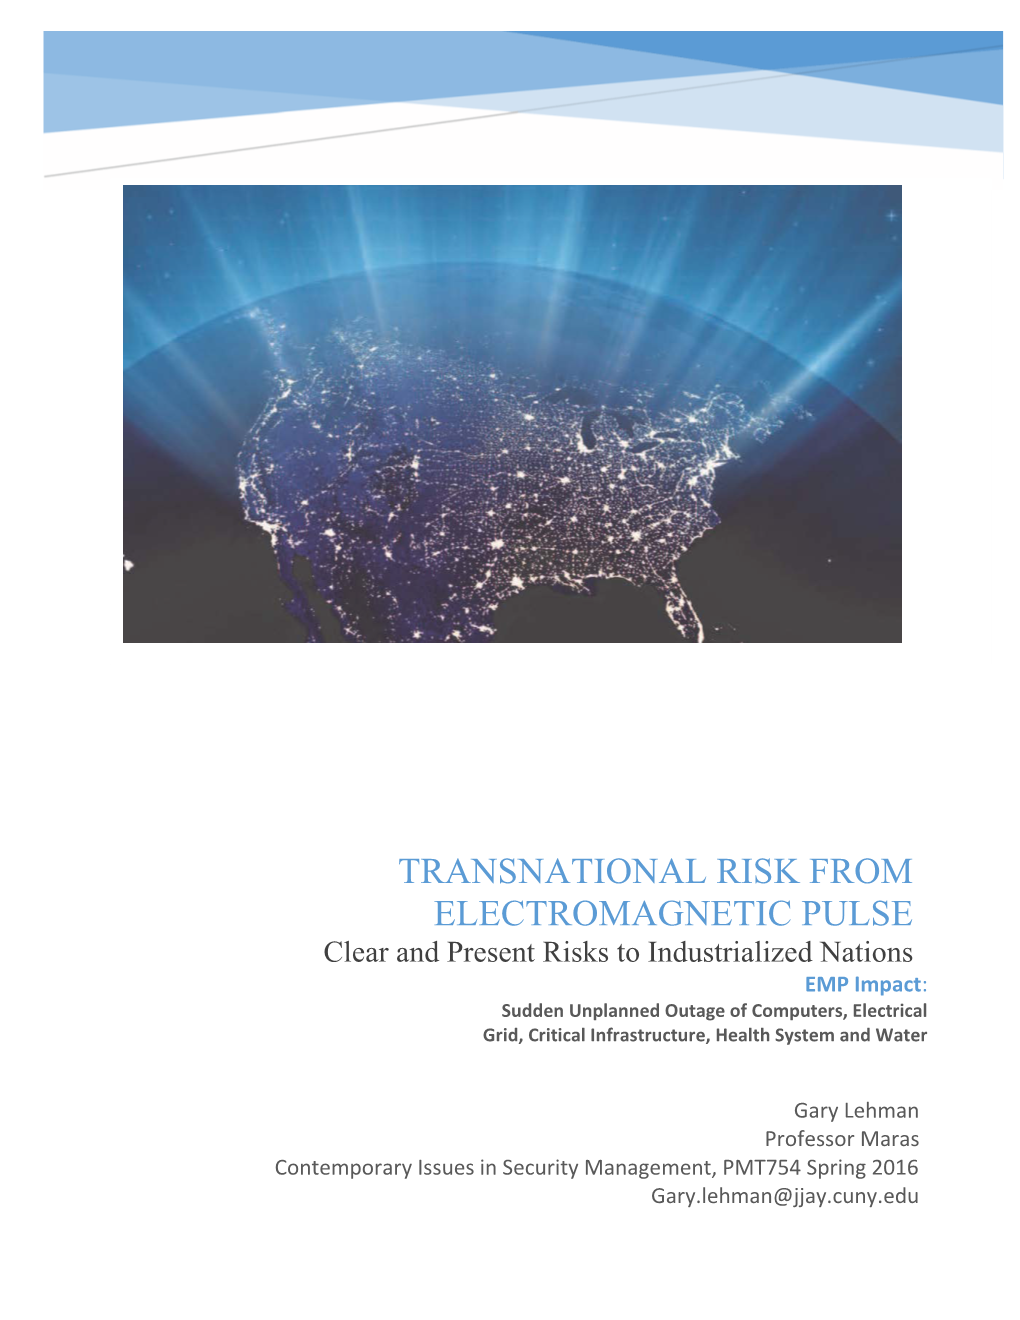 Transnational Risk from Electromagnetic Pulse